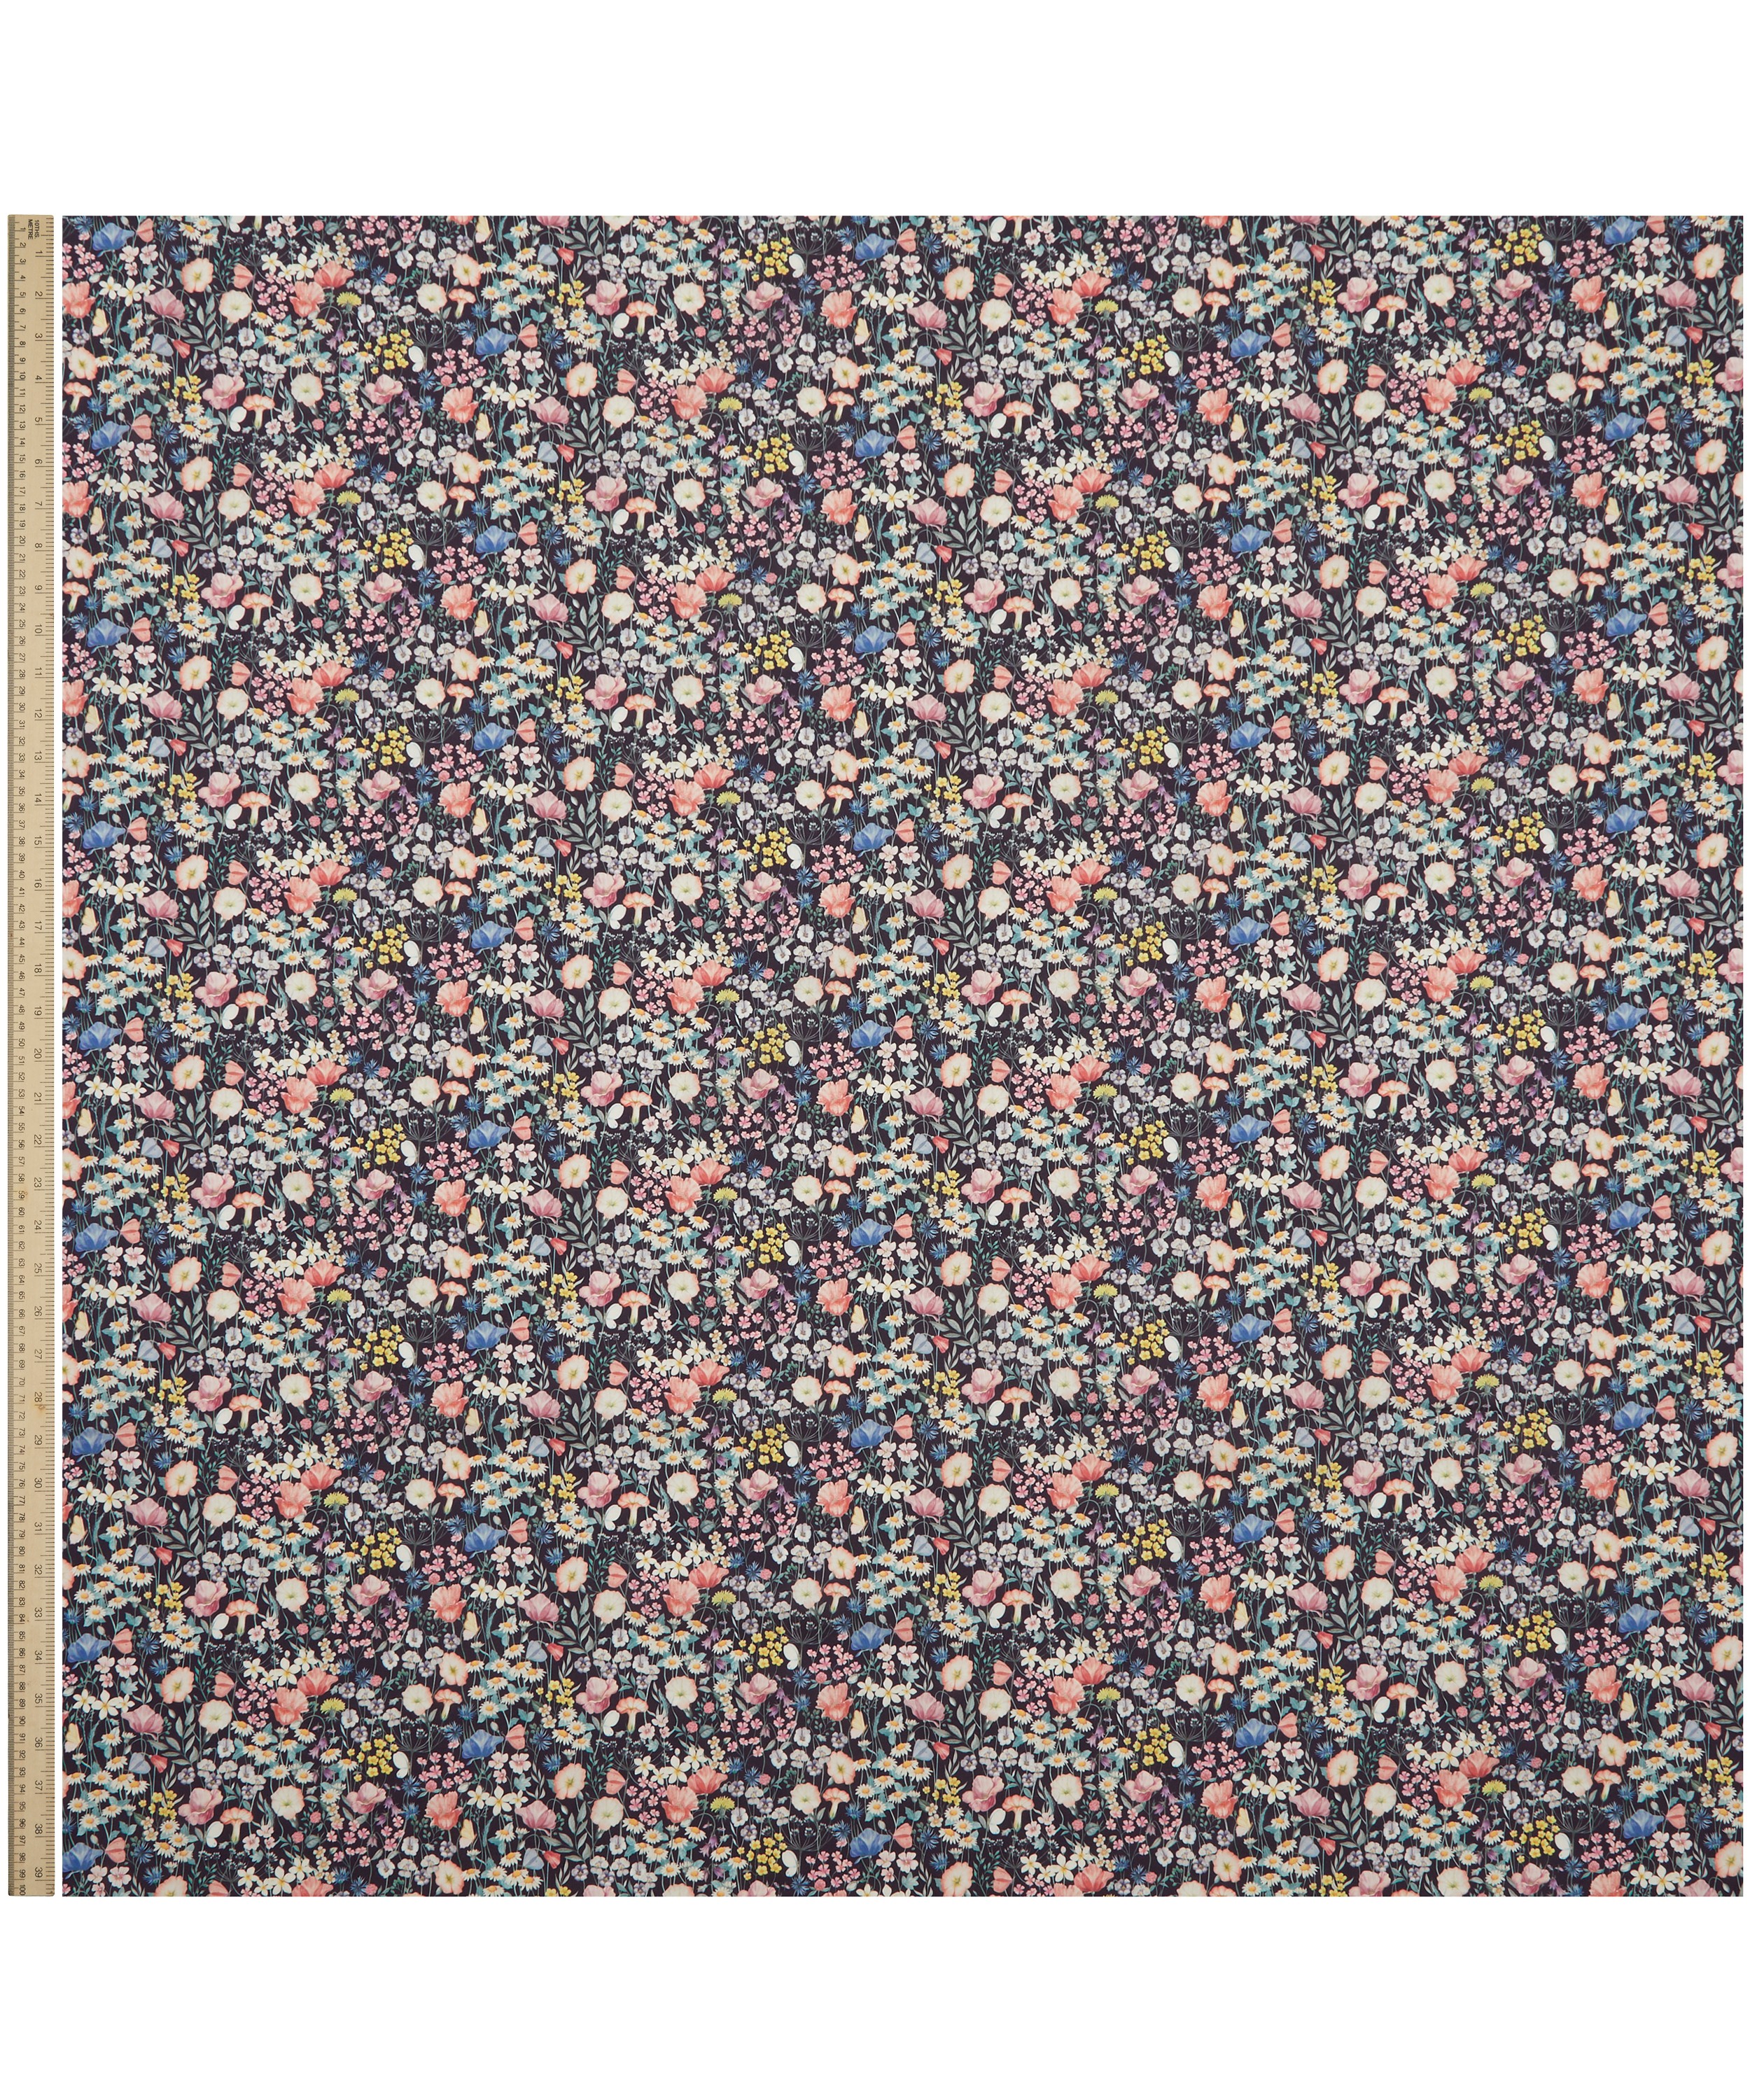 Where to Buy Liberty Fabric on Sale